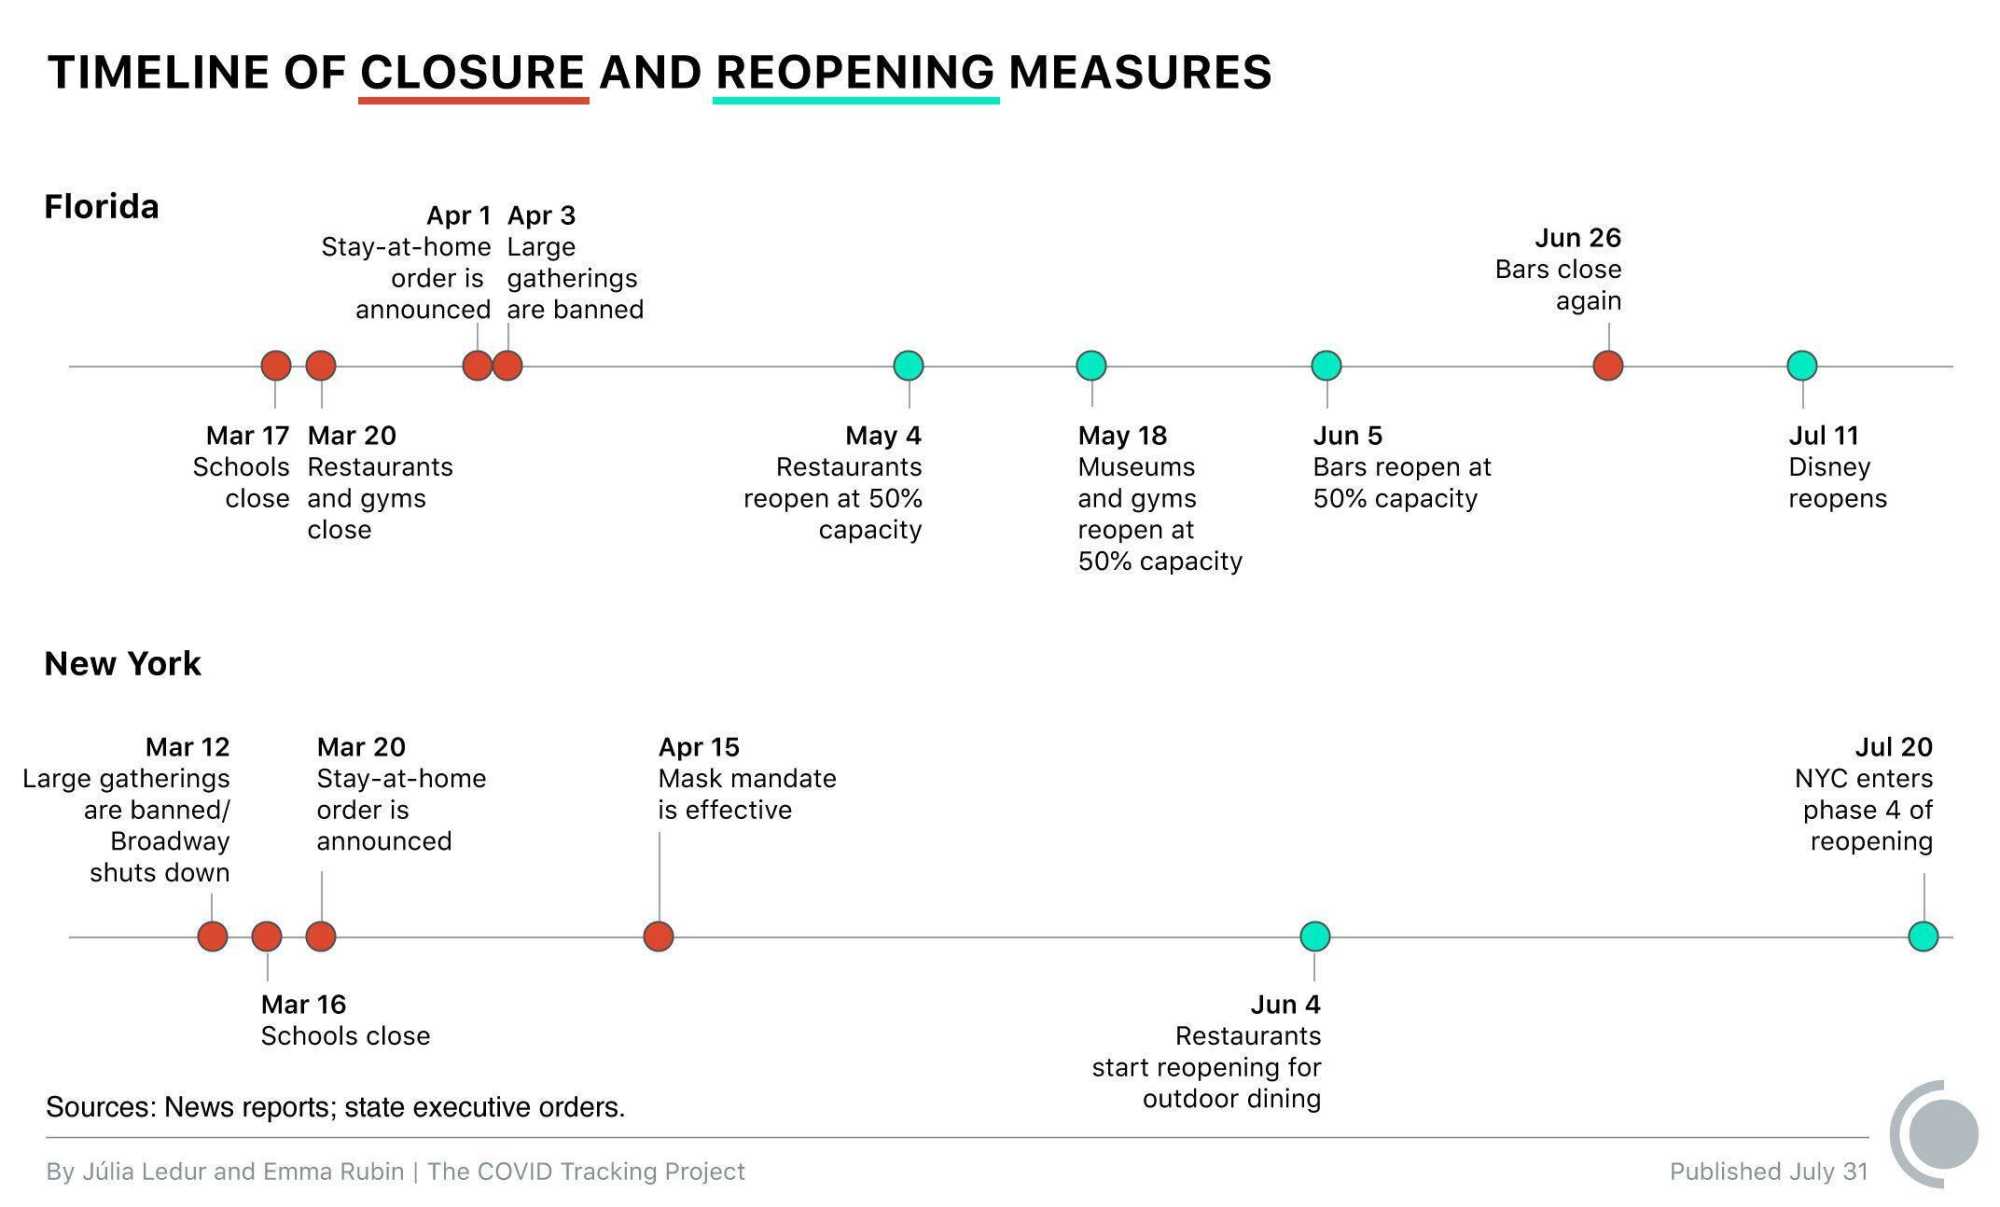 Timeline showing closure and reopening measures in Florida and New York, from March to July, 2020.